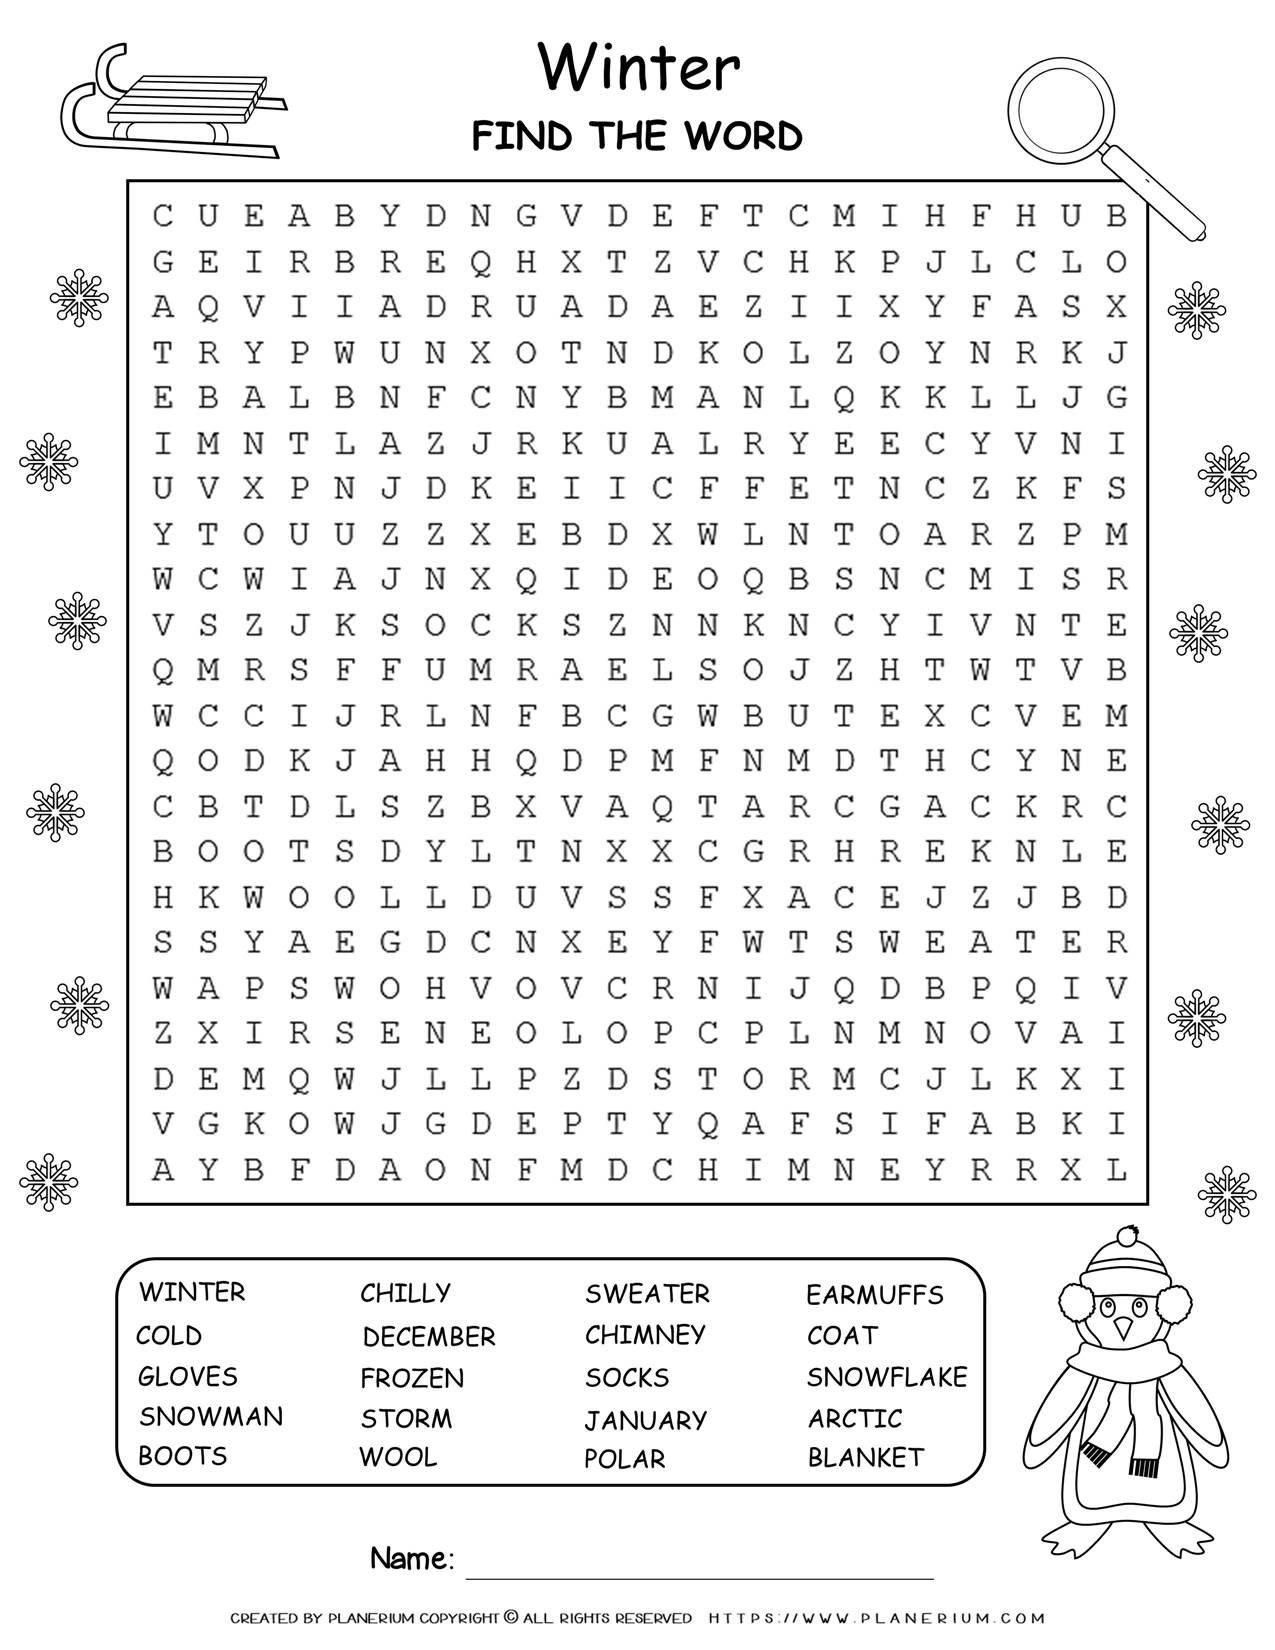 Winter Word Searches Free Printable - Printable World Holiday